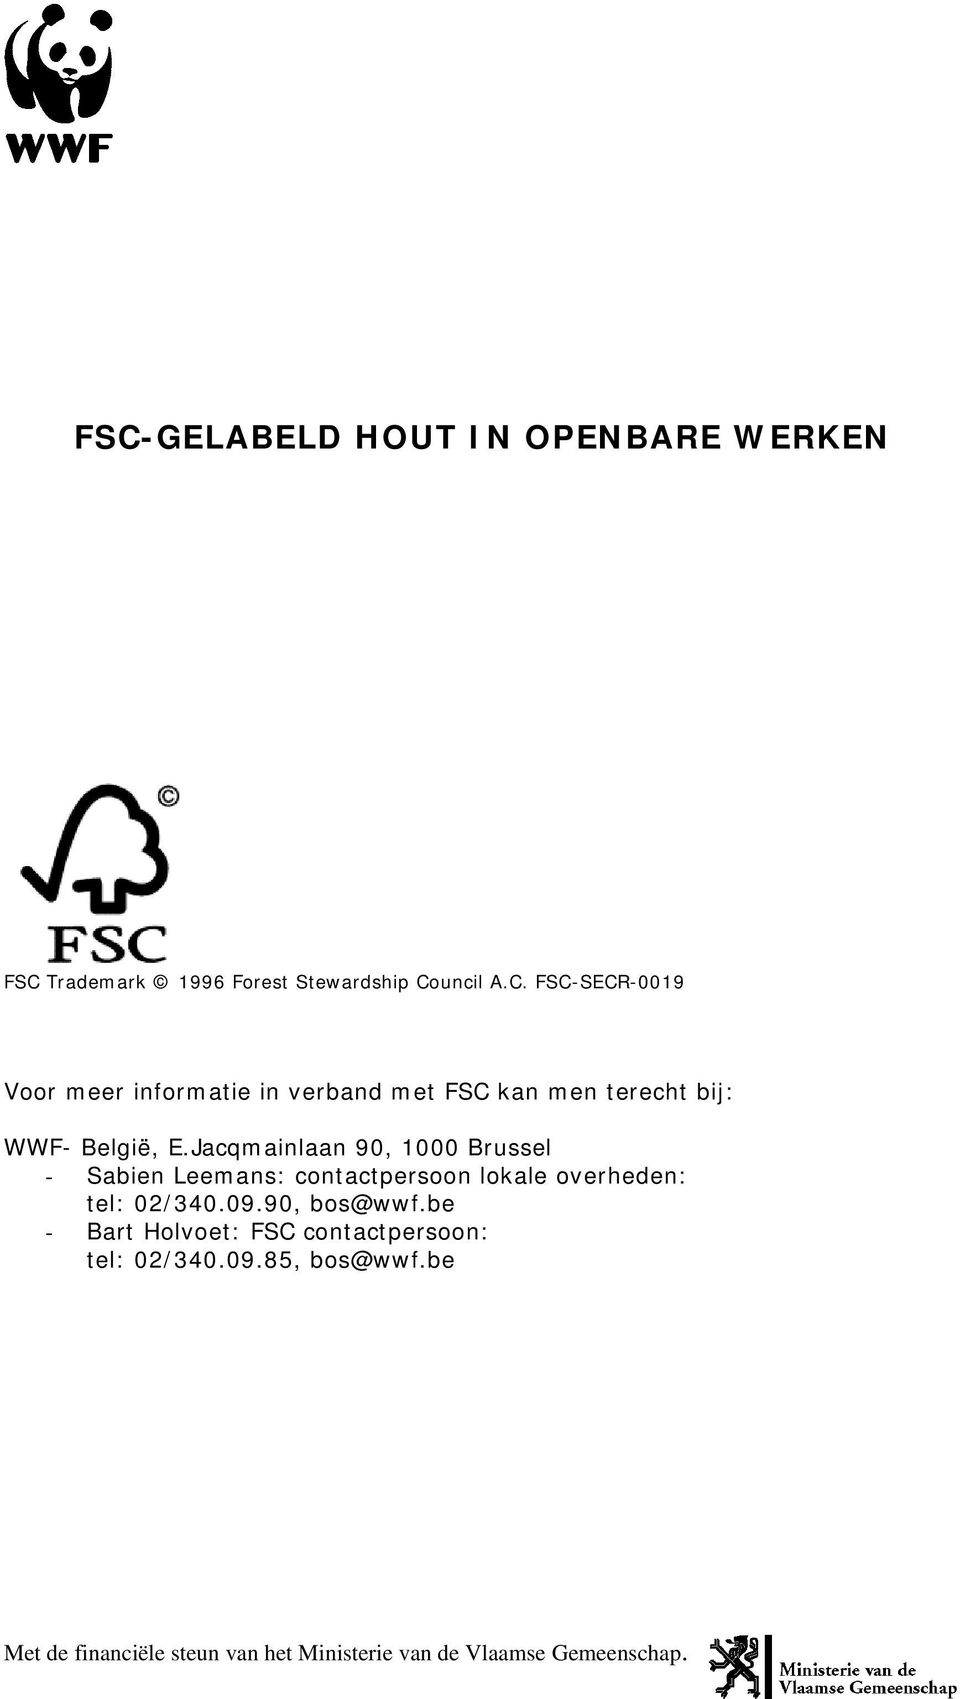 90, bos@wwf.be - Bart Holvoet: FSC contactpersoon: tel: 02/340.09.85, bos@wwf.